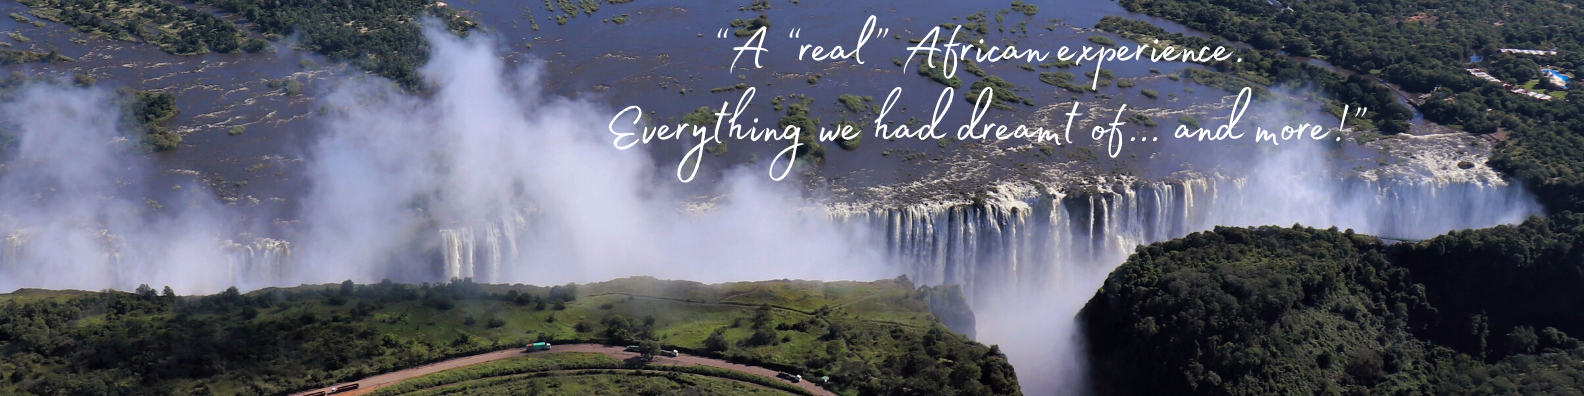 Victoria Falls home page banner high res